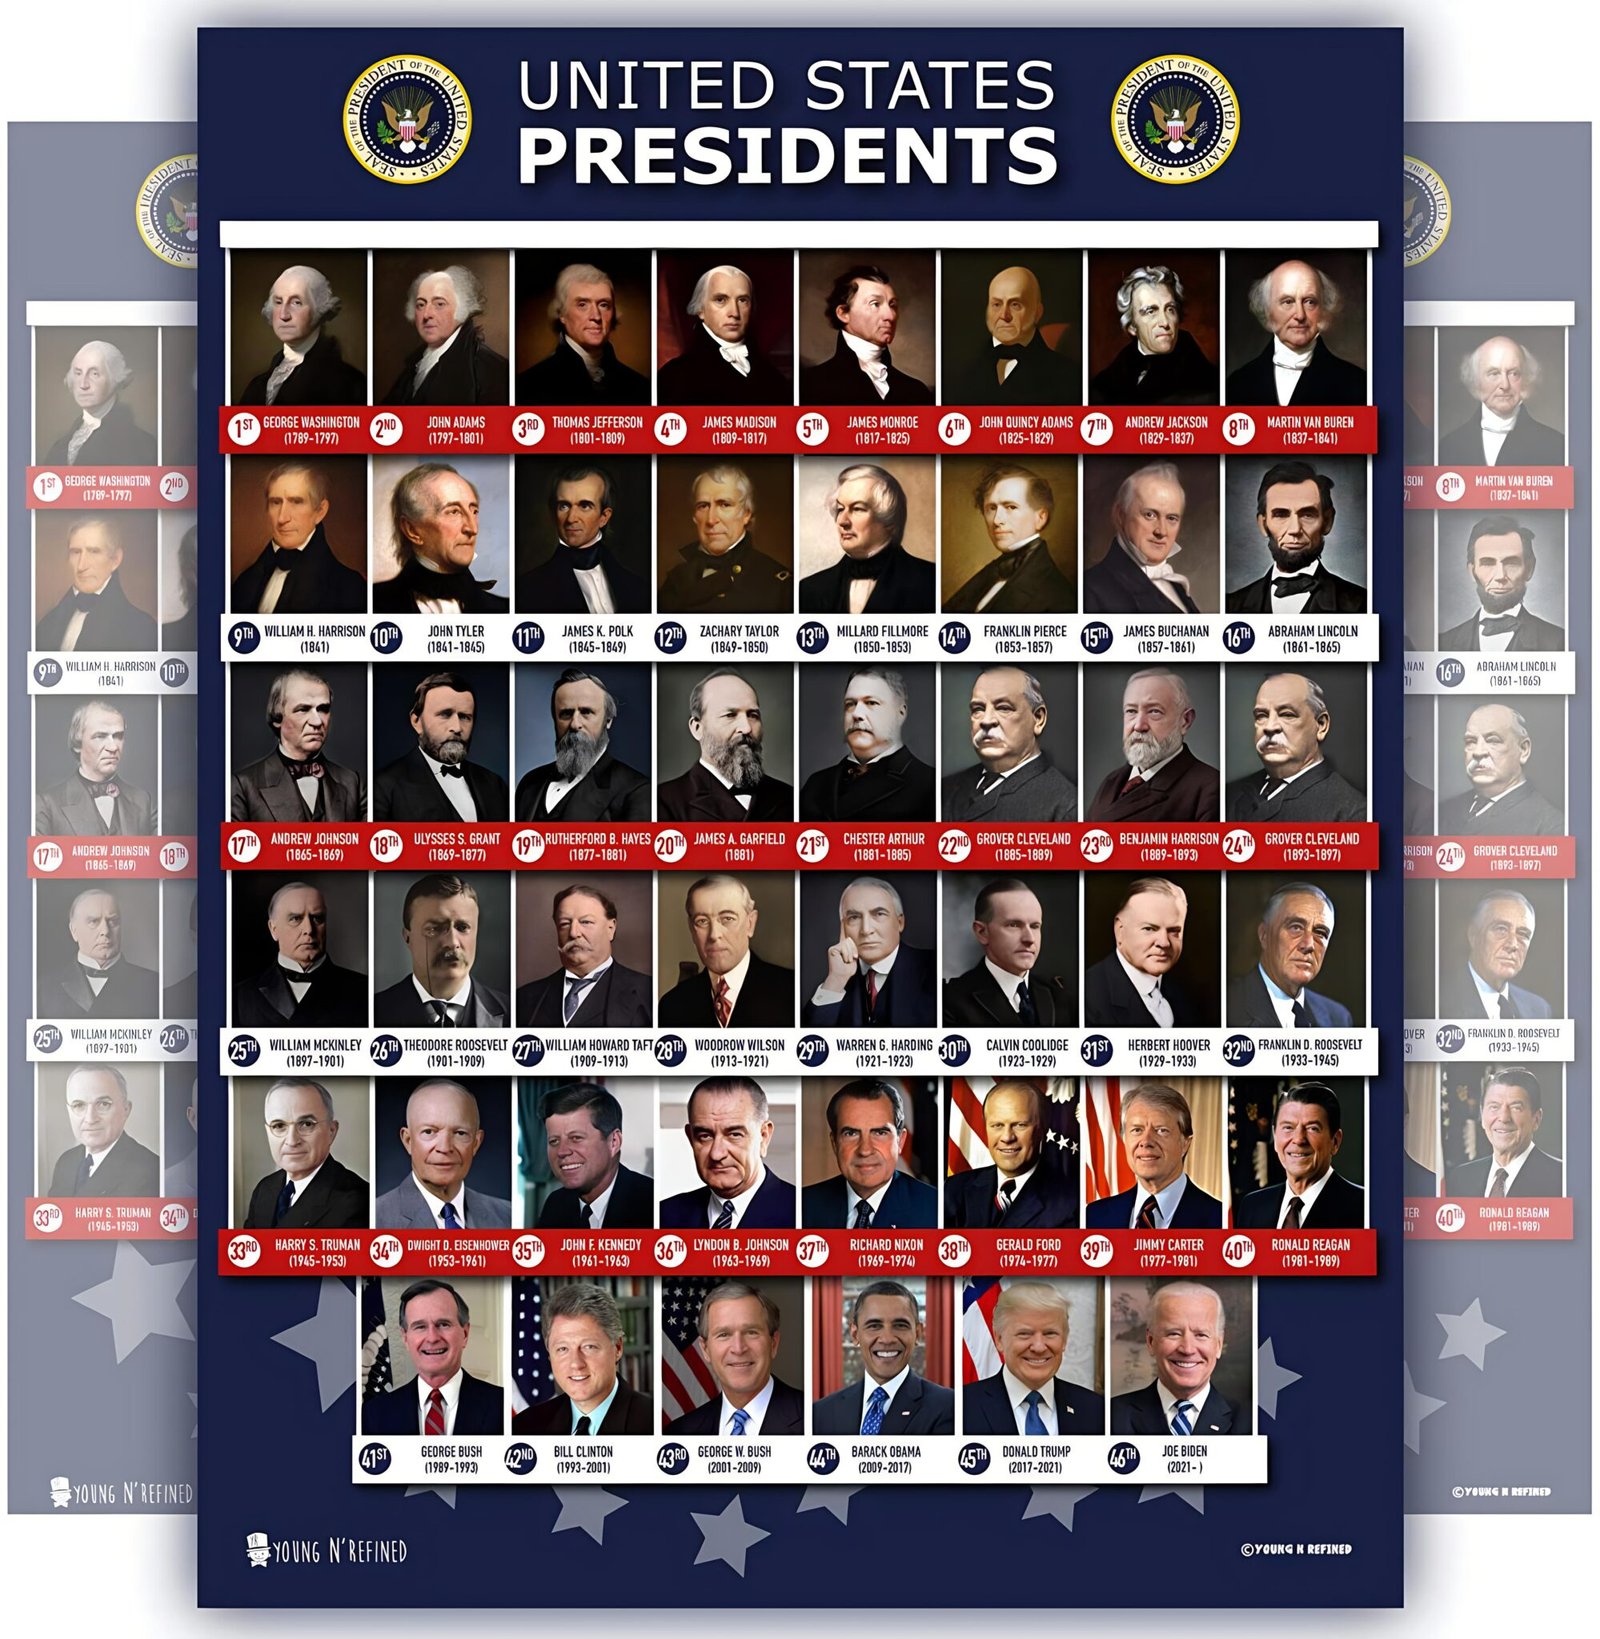 100-unusual-facts-about-46-u-s-presidents-by-years